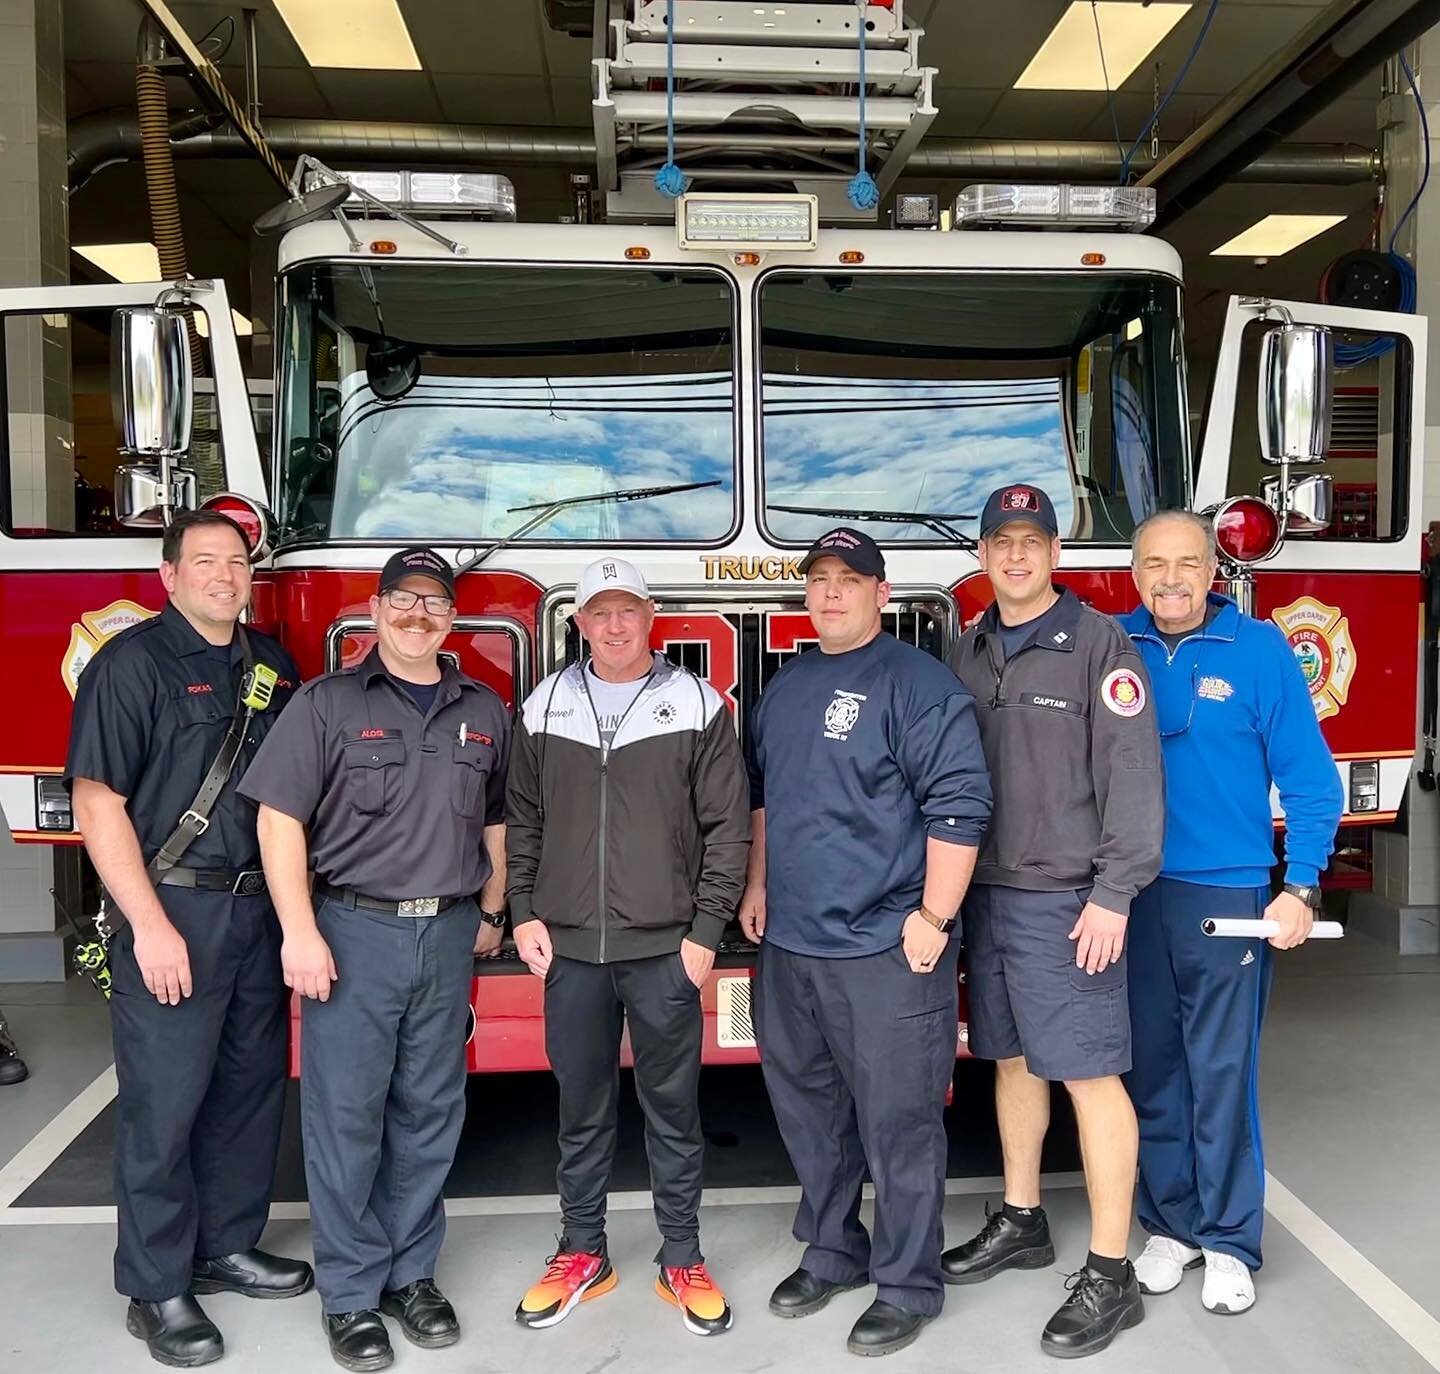 Professional Boxer &ldquo;Irish&rdquo; Micky Ward and Golden Gloves of America, Inc. President Bobby Russo stopped in to station 37 for a visit and chat with the crew today. Micky left his mark in the company log book and provided some laughs and wor